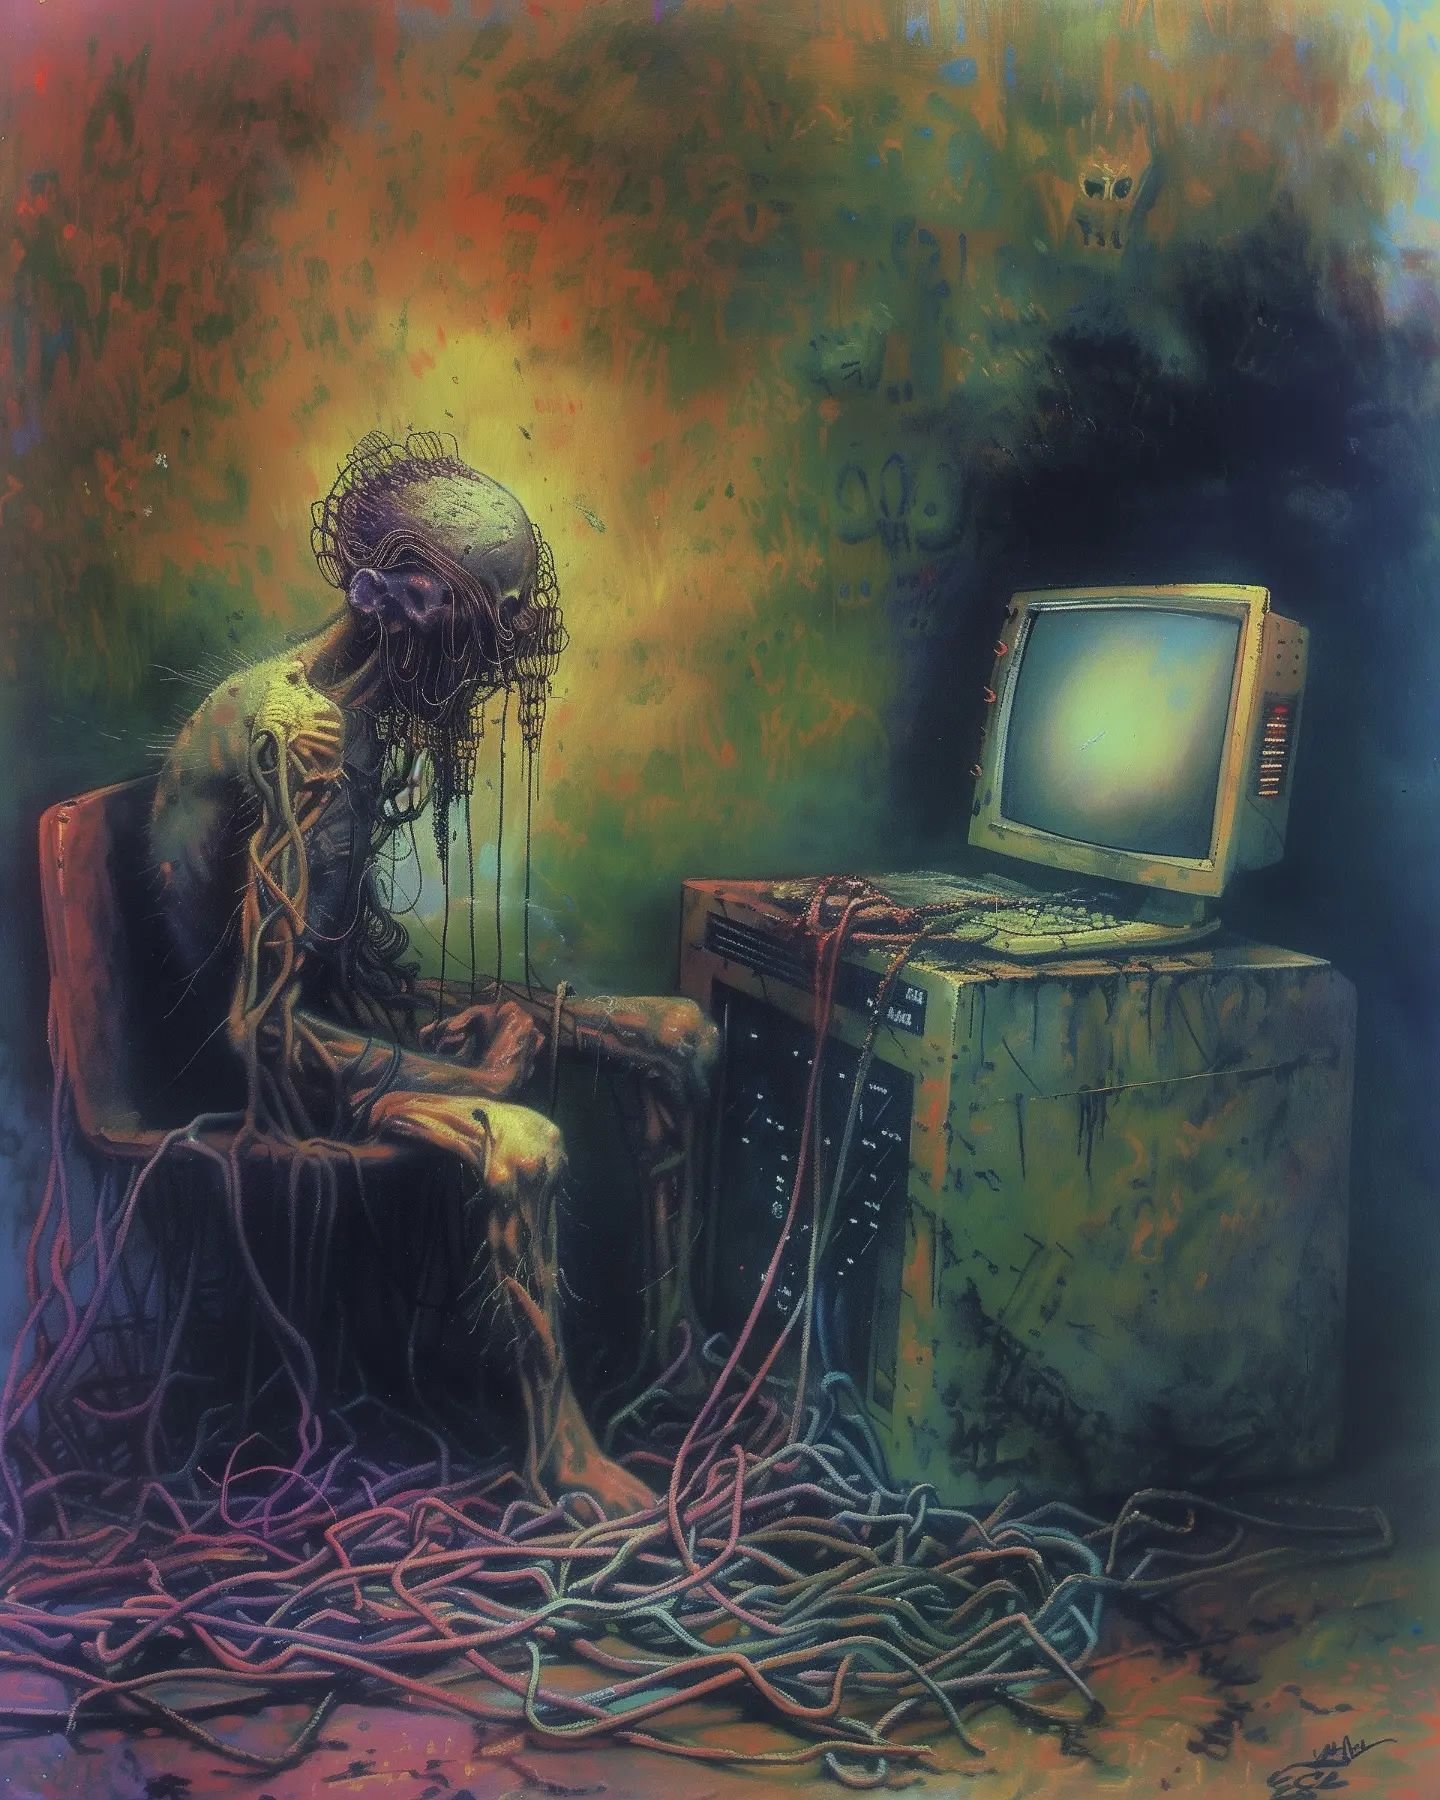 Plugged in. 

Inspired by the works of Zdzislaw Beksinski.

#ai #aigeneratedart #aiartcommunity #midjourneyai #midjourney #midjourneyart #horror #horrorart #macabre #macabreart #goodgrief